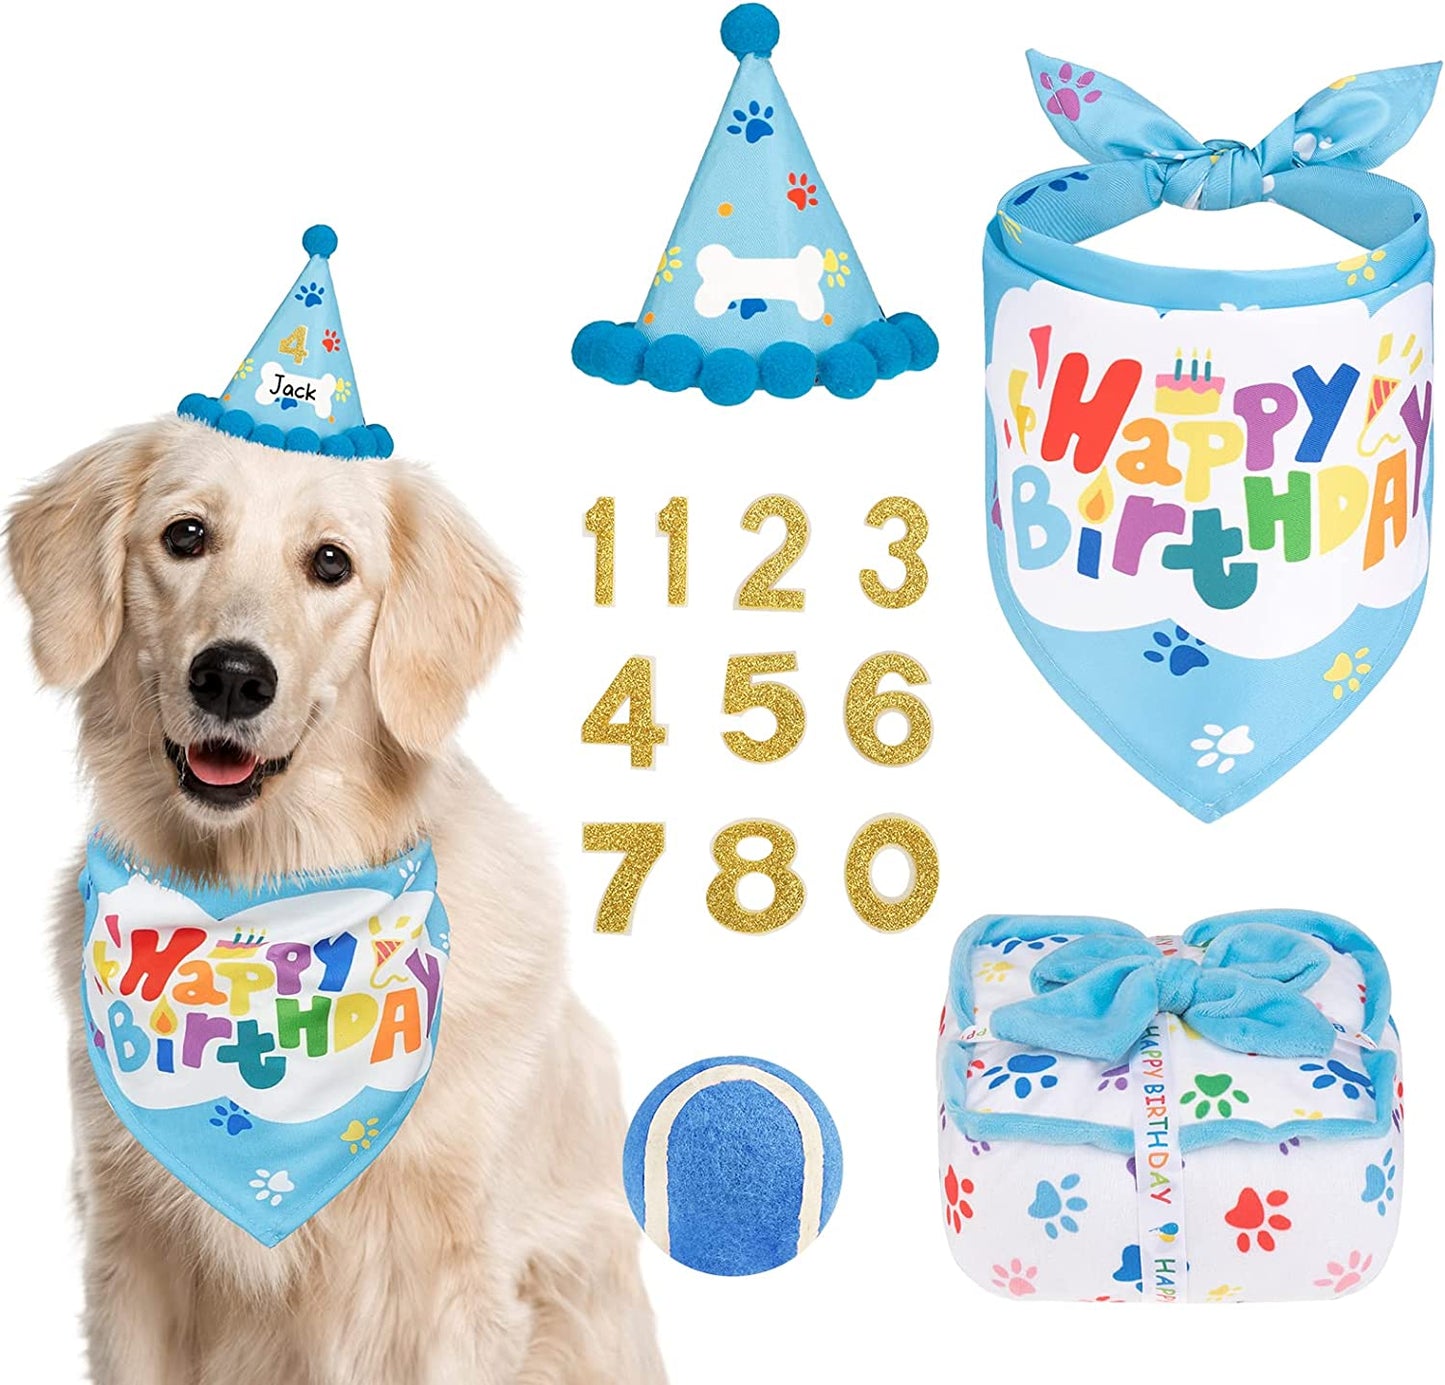 EXPAWLORER Dog Birthday Outfit - Cute Hat Bandana Scarf and Squeaky Cake Dog Toy for Birthday Party Supplies Gift, Great Party Decorations for Small Medium Large Dogs Girl Pink Animals & Pet Supplies > Pet Supplies > Dog Supplies > Dog Apparel EXPAWLORER Blue Tennis 